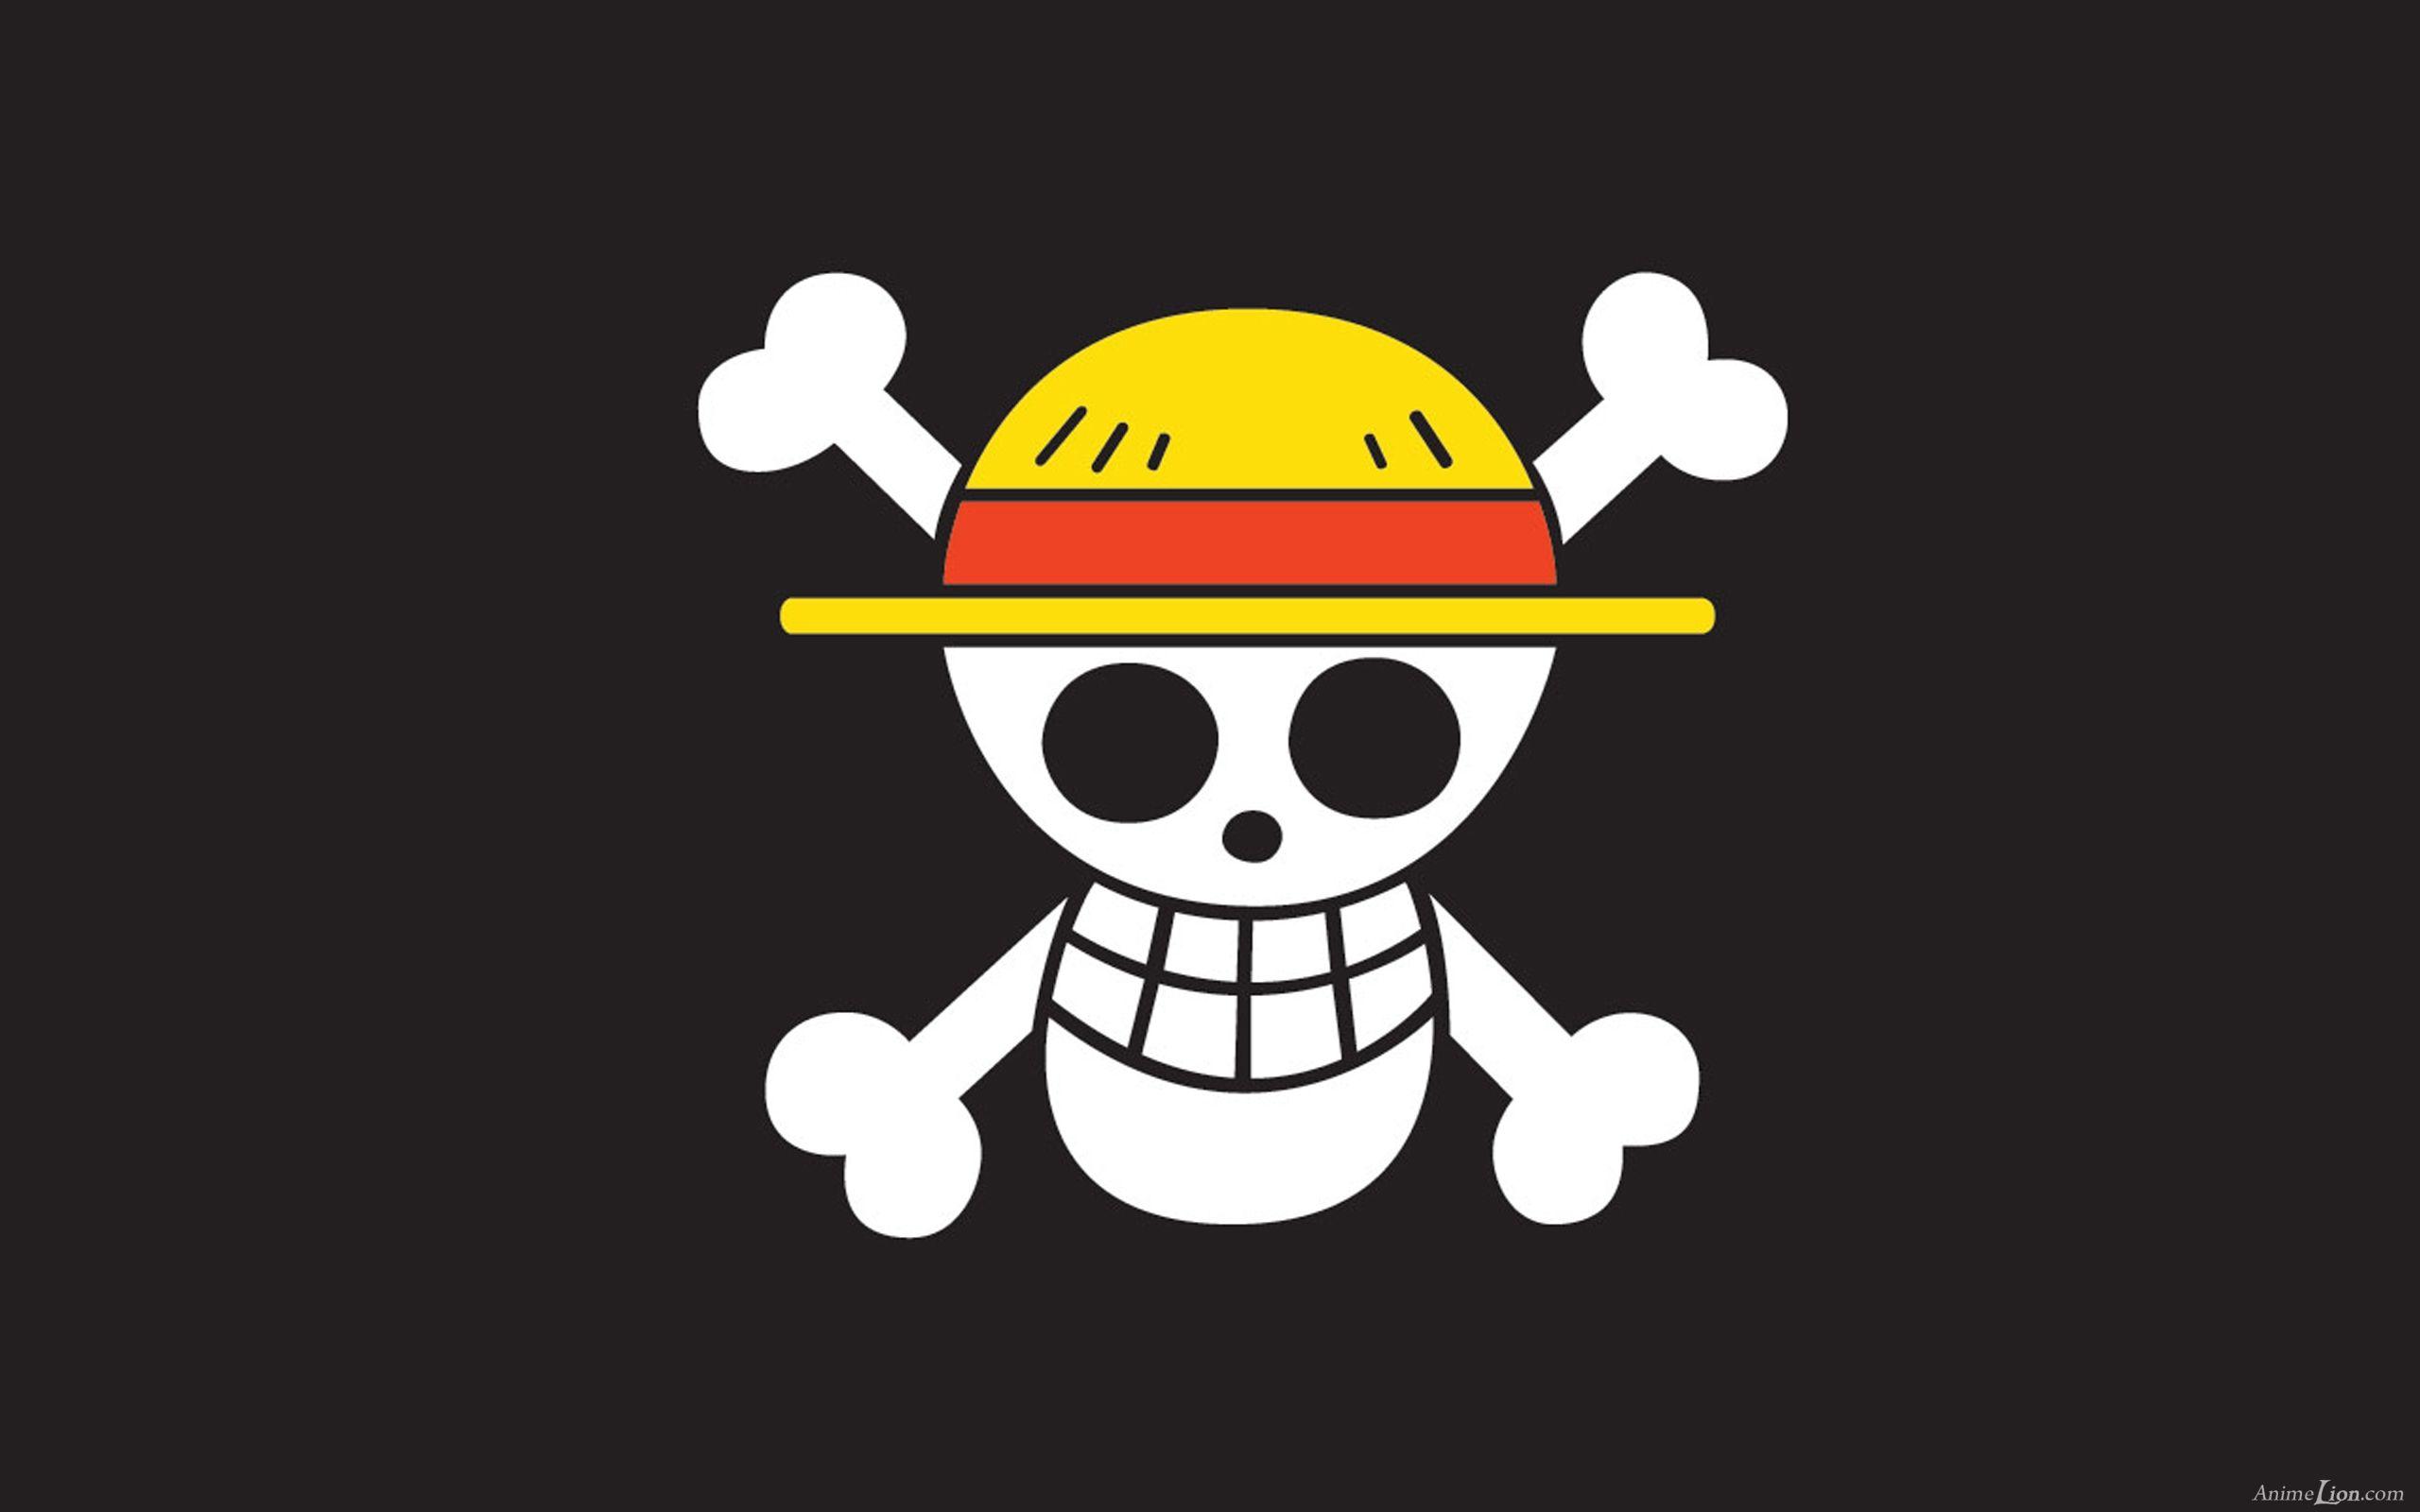 One Piece Logo Wallpapers Top Free One Piece Logo Backgrounds